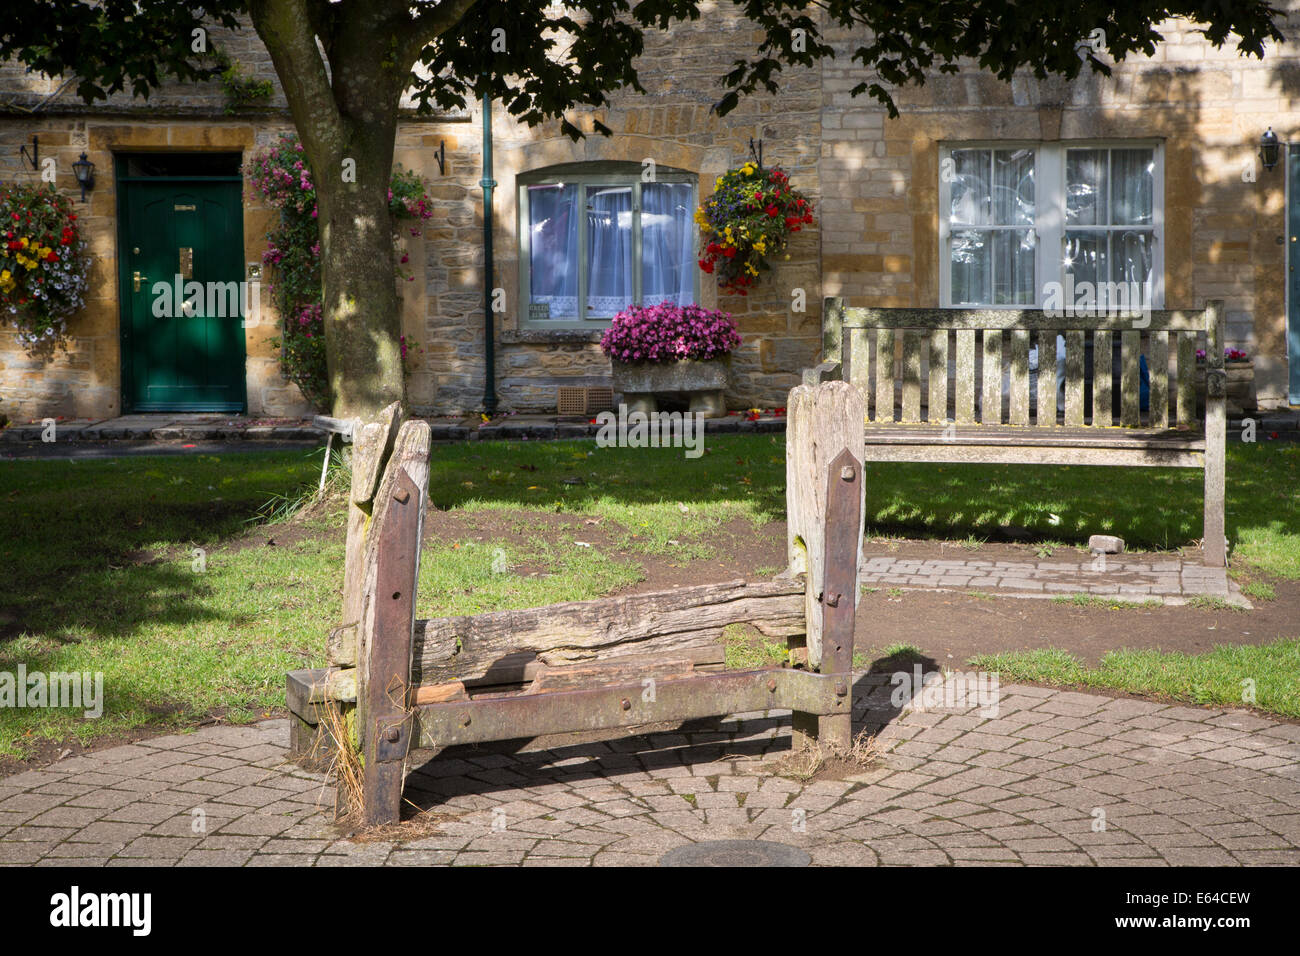 Old stocks in the public square, Stow-on-the-Wold, the Cotswolds, Gloucestershire, England Stock Photo